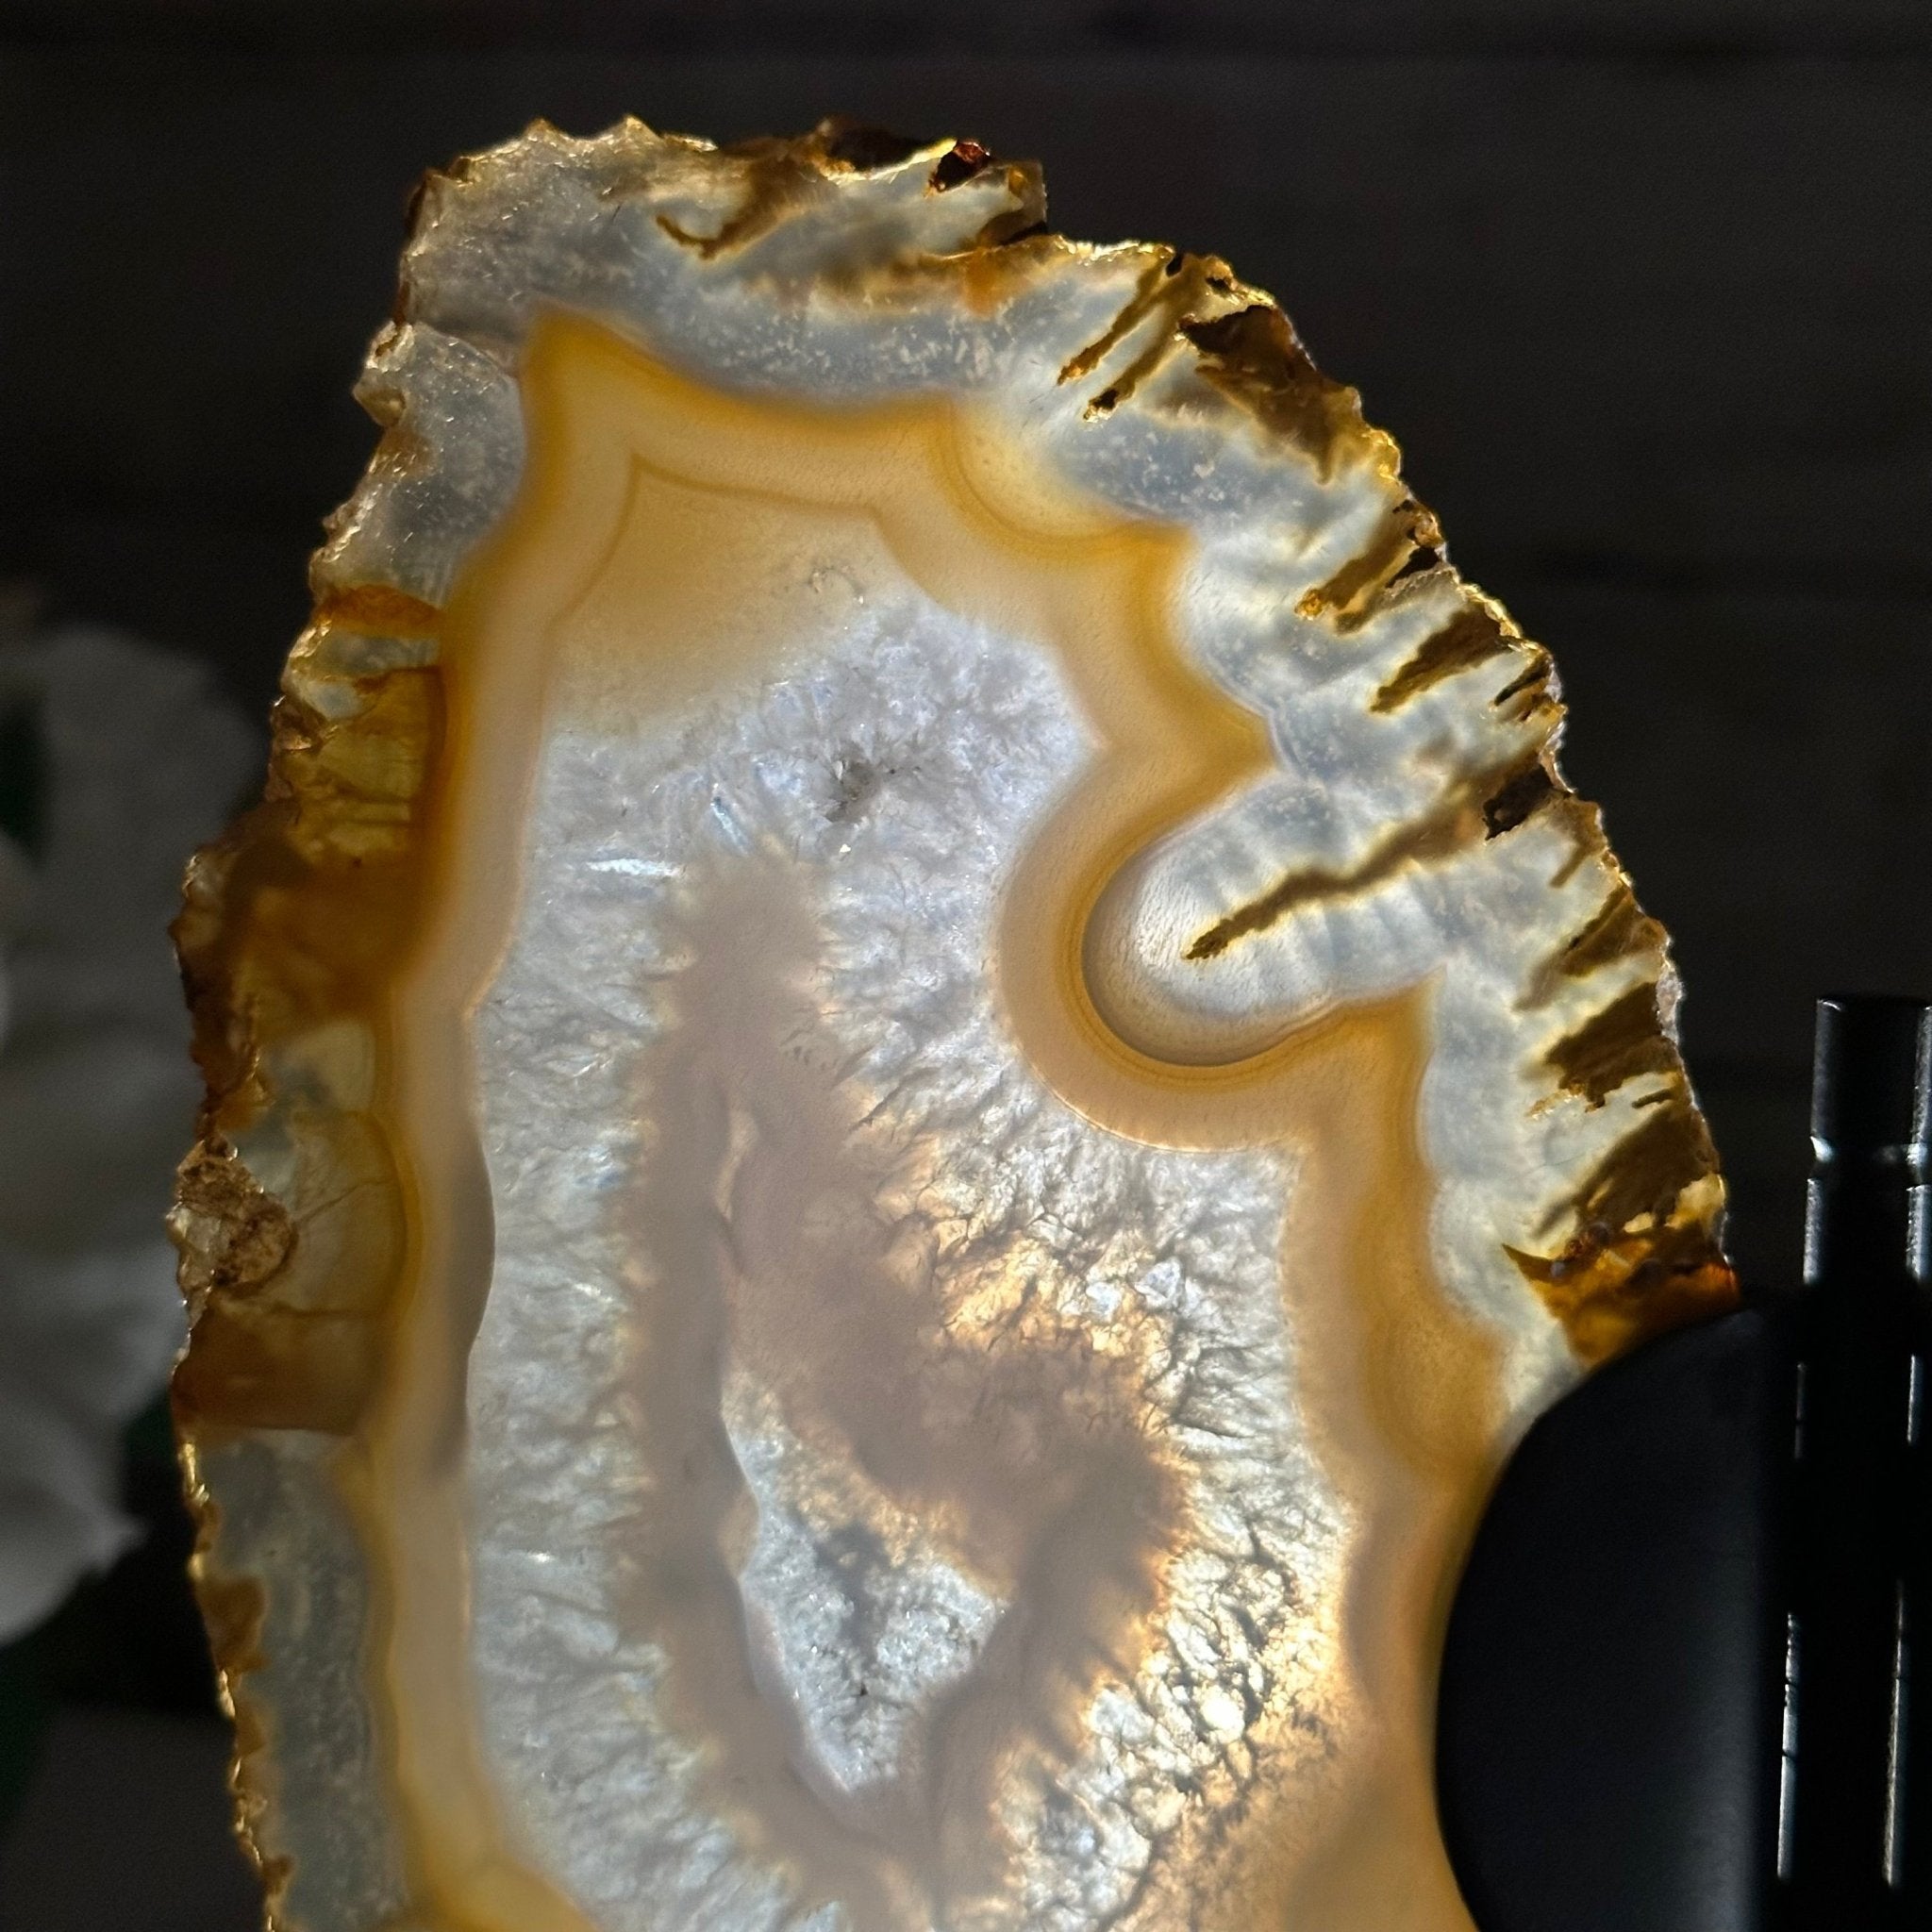 Natural Brazilian Agate "Butterfly Wings", 8" Tall #5050NA-145 - Brazil GemsBrazil GemsNatural Brazilian Agate "Butterfly Wings", 8" Tall #5050NA-145Agate Butterfly Wings5050NA-145